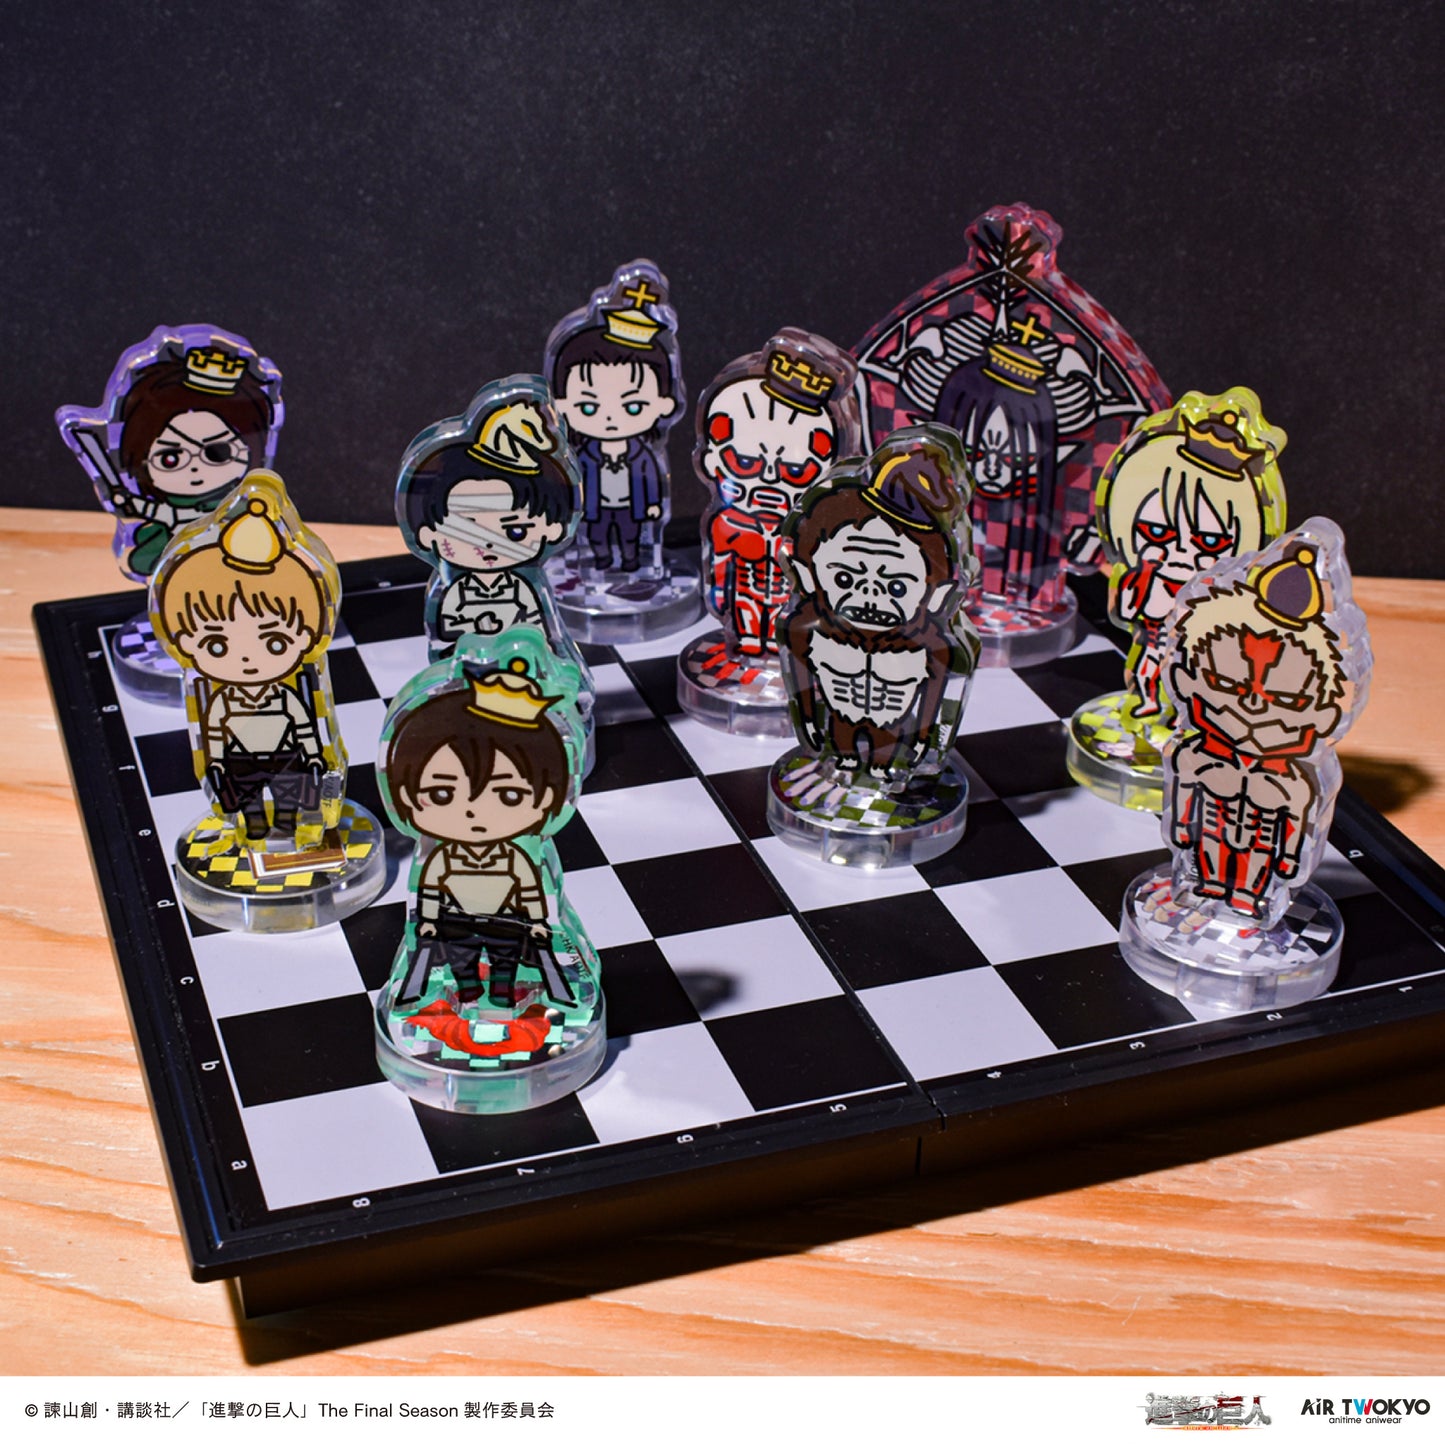 TV Anime “Attack on Titan” The Final Season Chess Stand